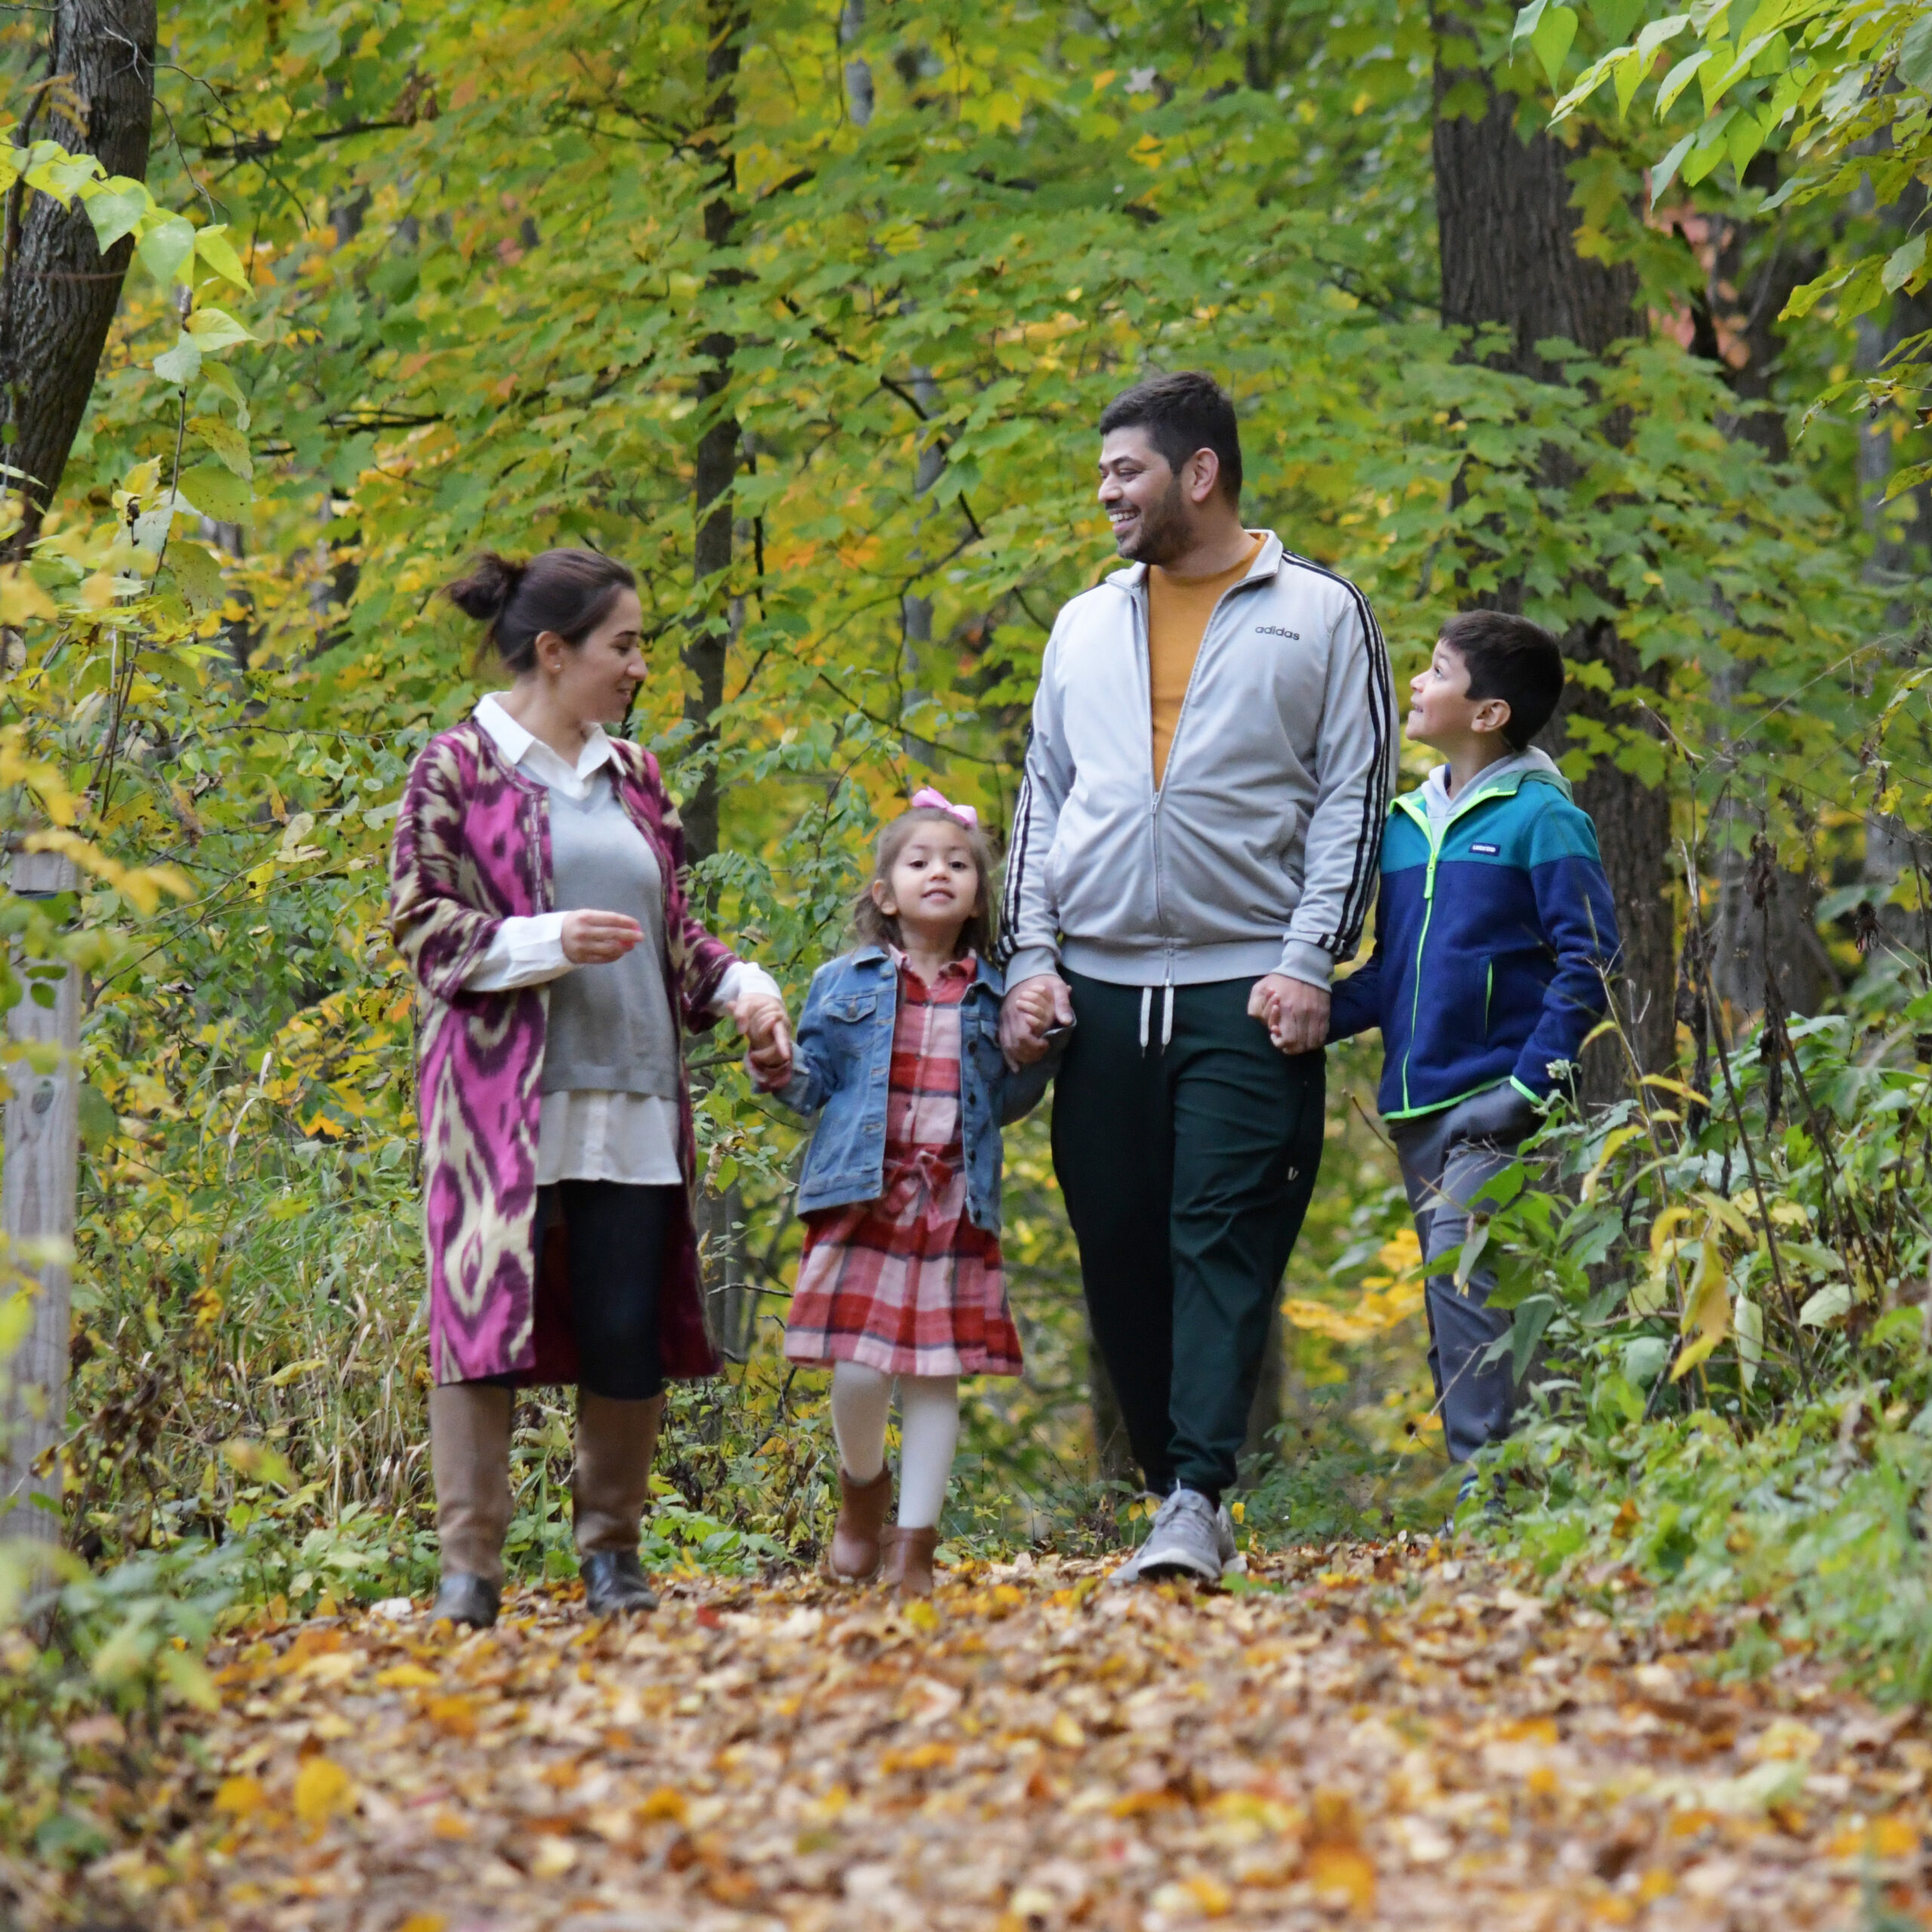 Family of four enjoying a walk in a forest with autumn leaves on the ground.